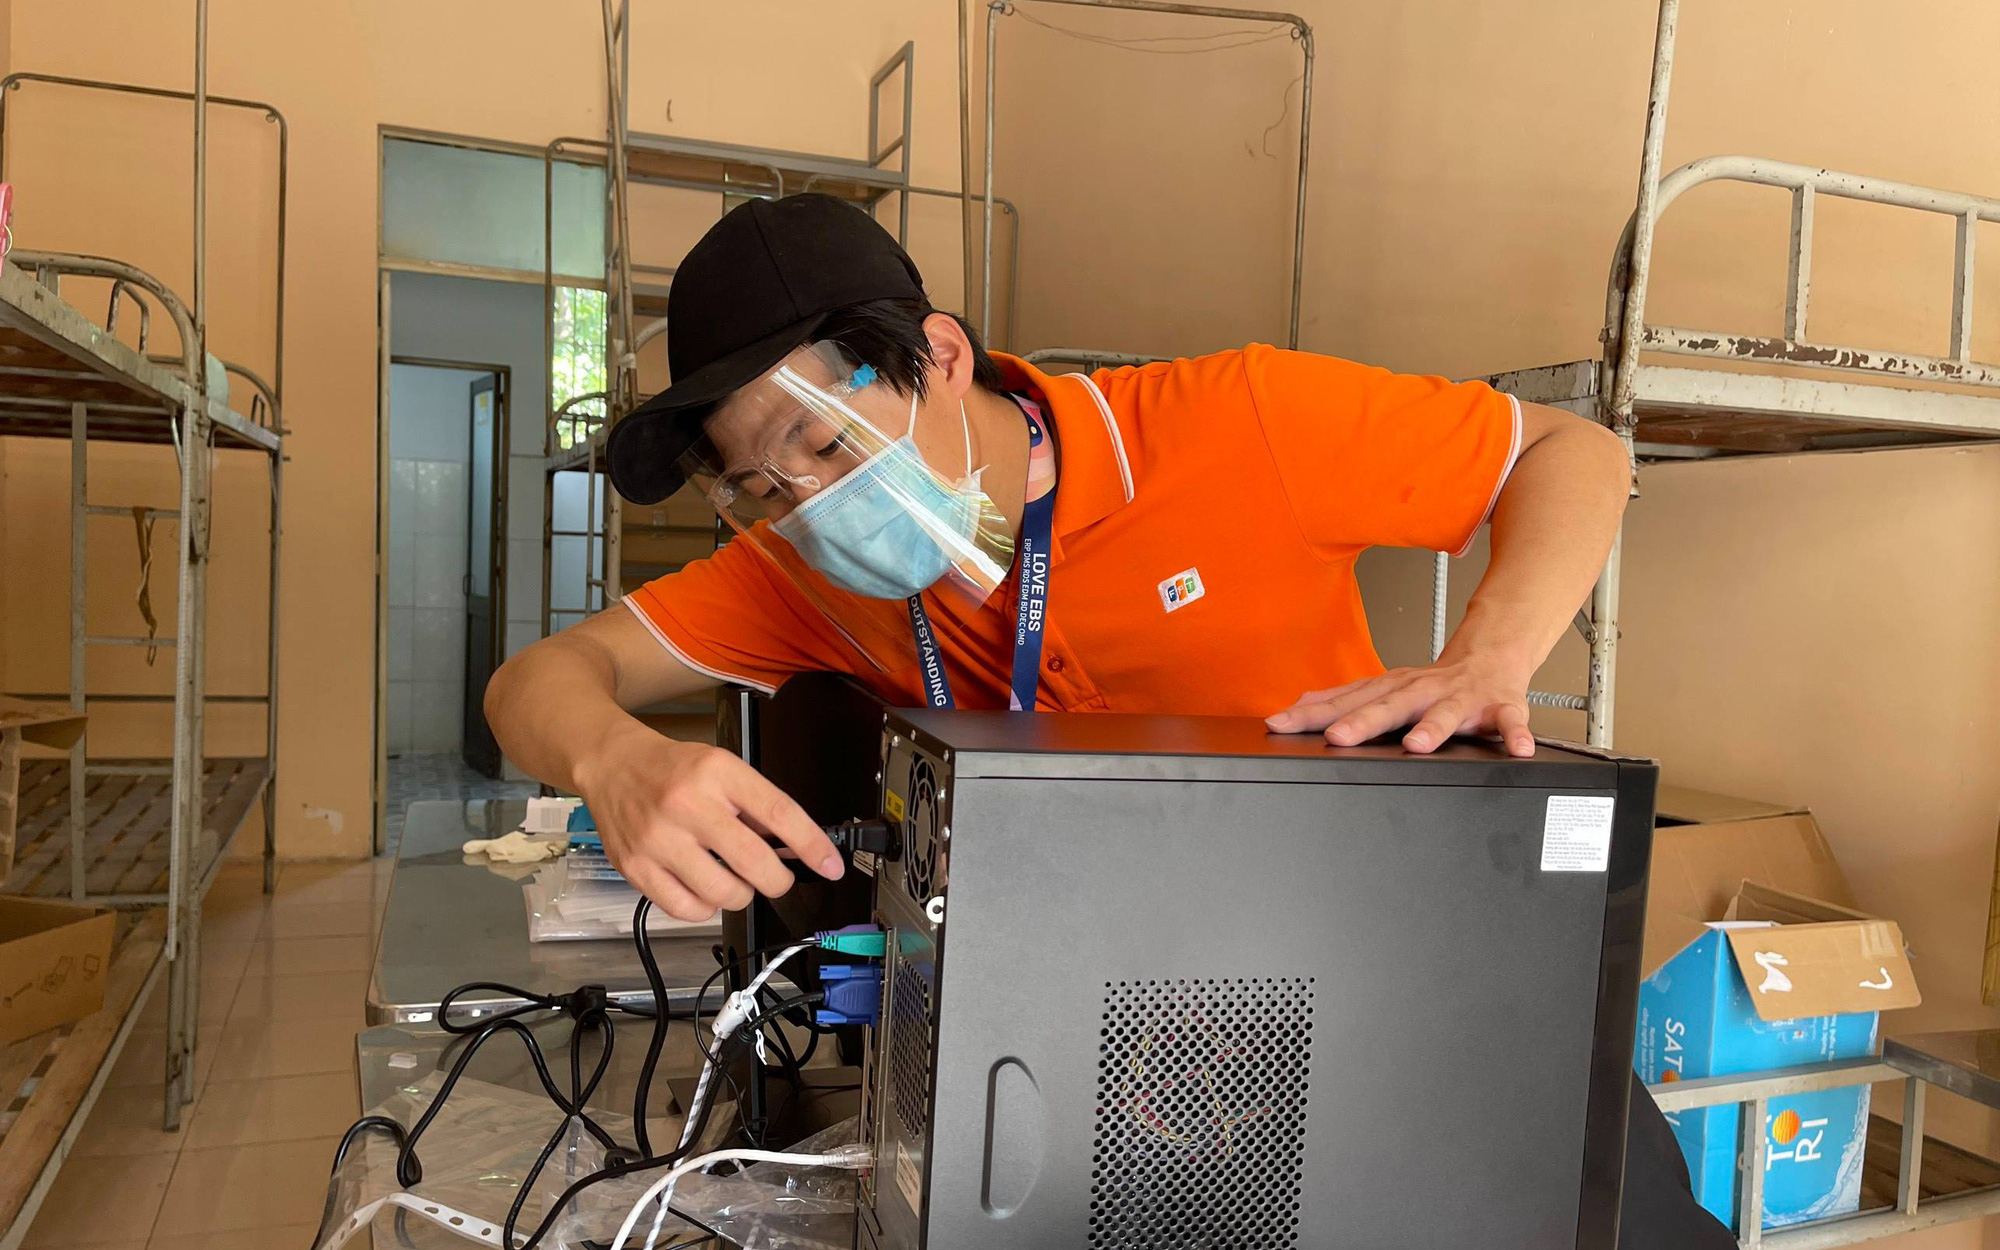 FPT quickly deploys IT infrastructure and equipment for the field hospital in Thu Duc